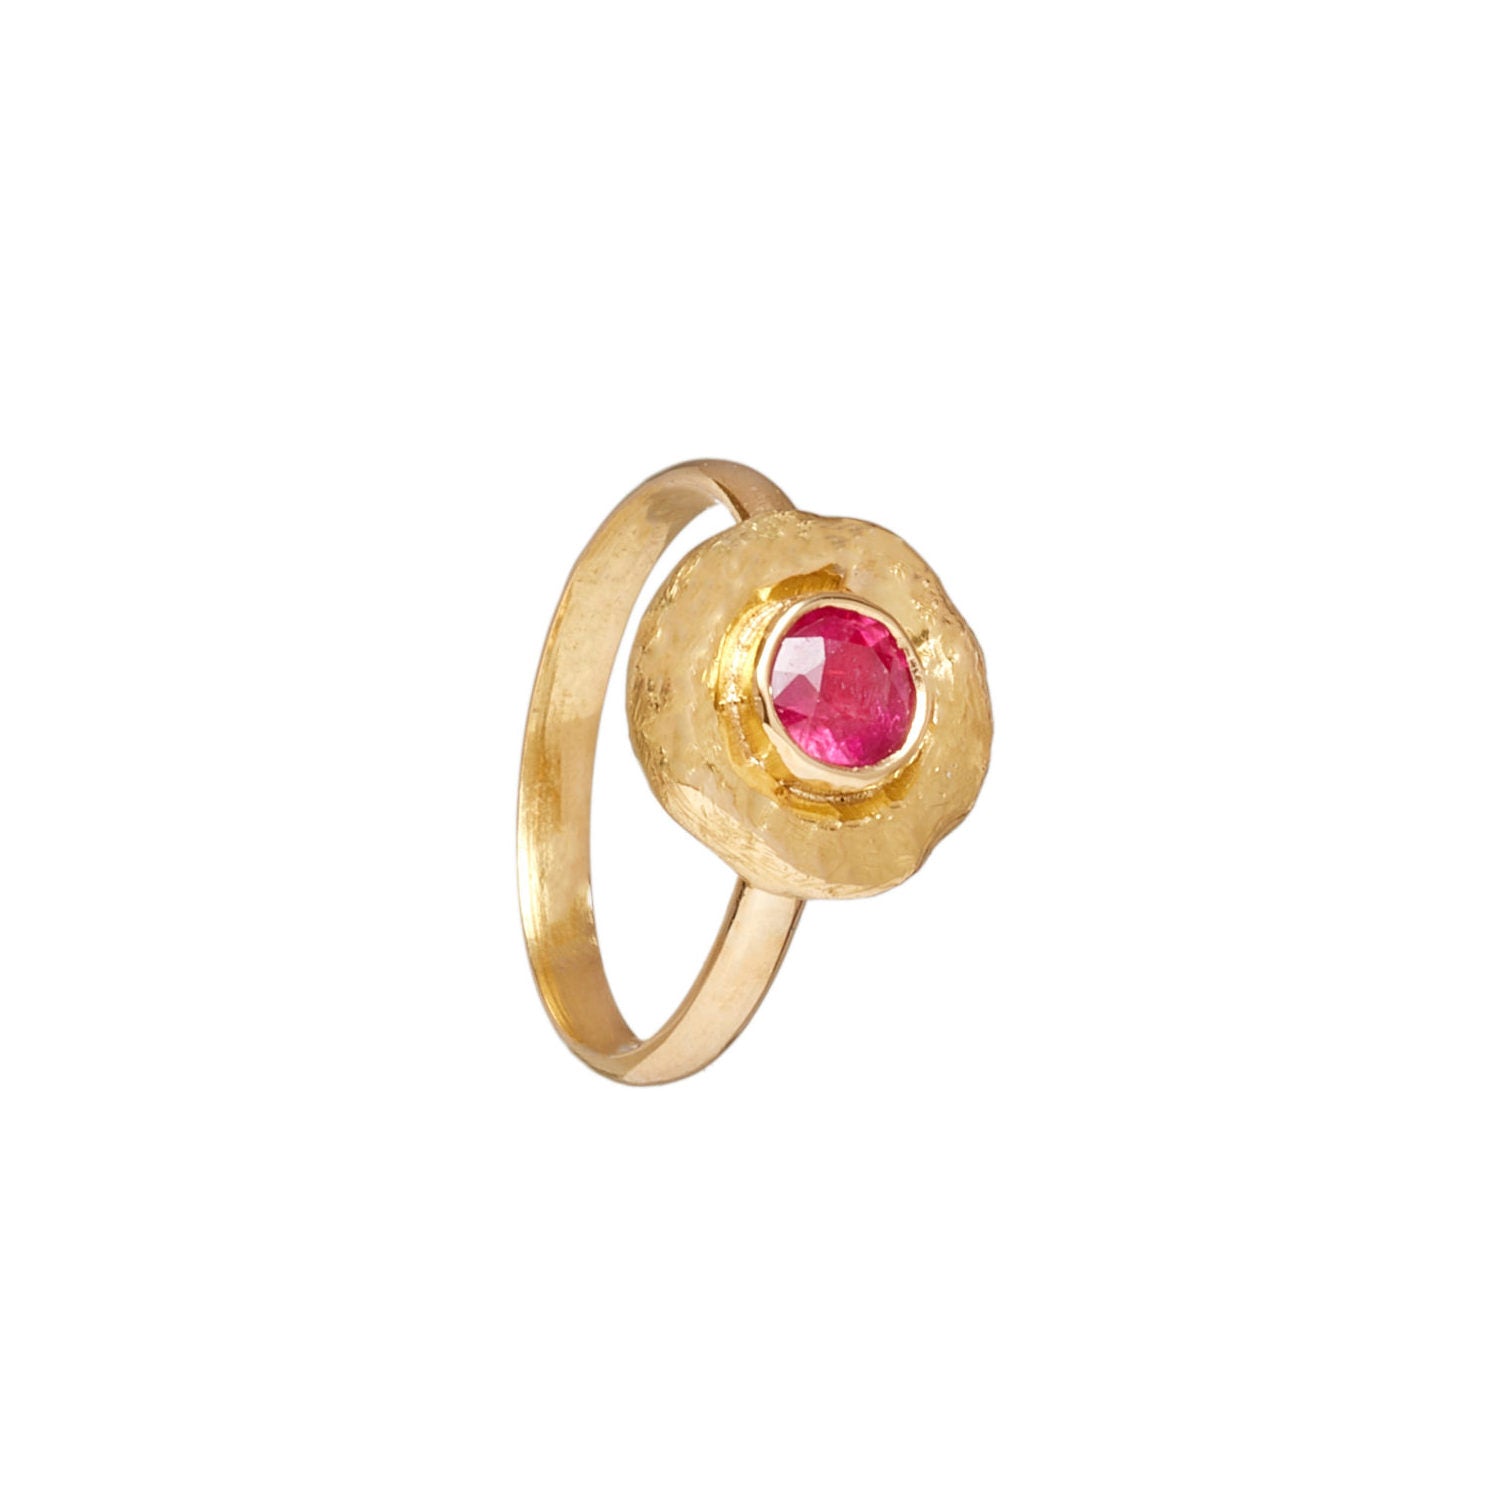 RING - ONE RUBY